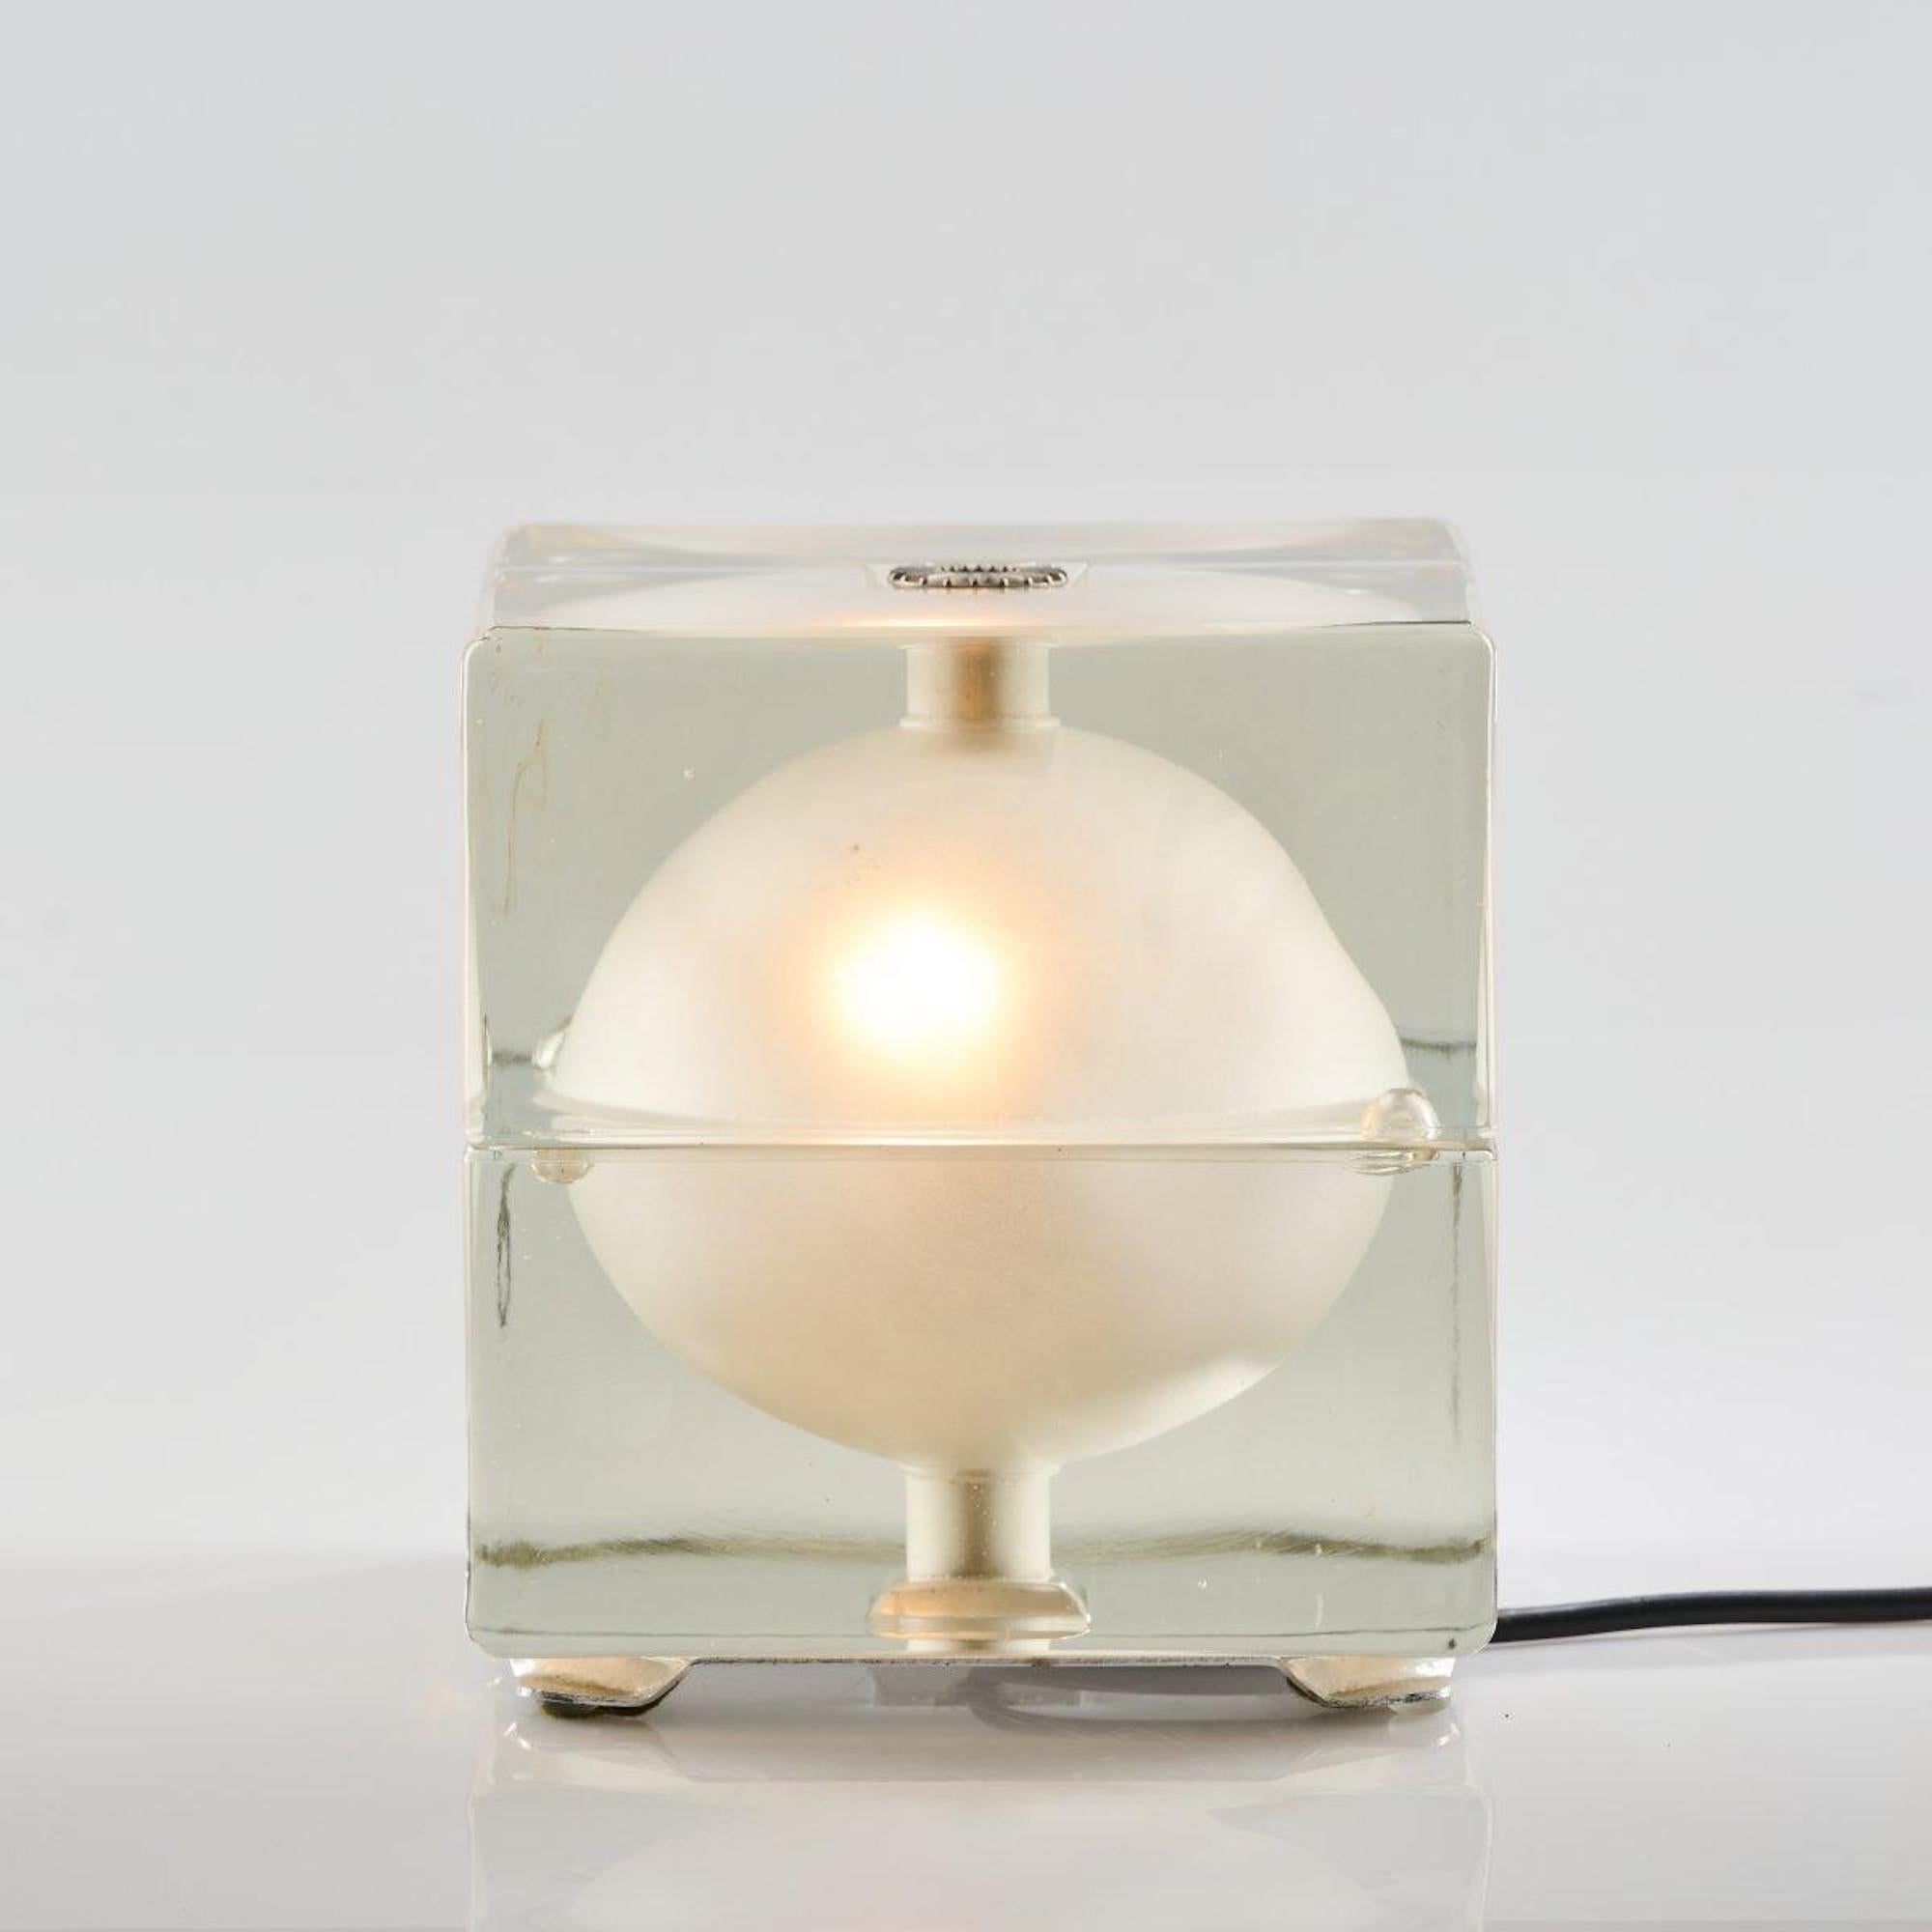 Mid-20th Century Table Lamp “Cubosfera” (Cubic Sphere) by Alessandro Mendini, 1968 For Sale